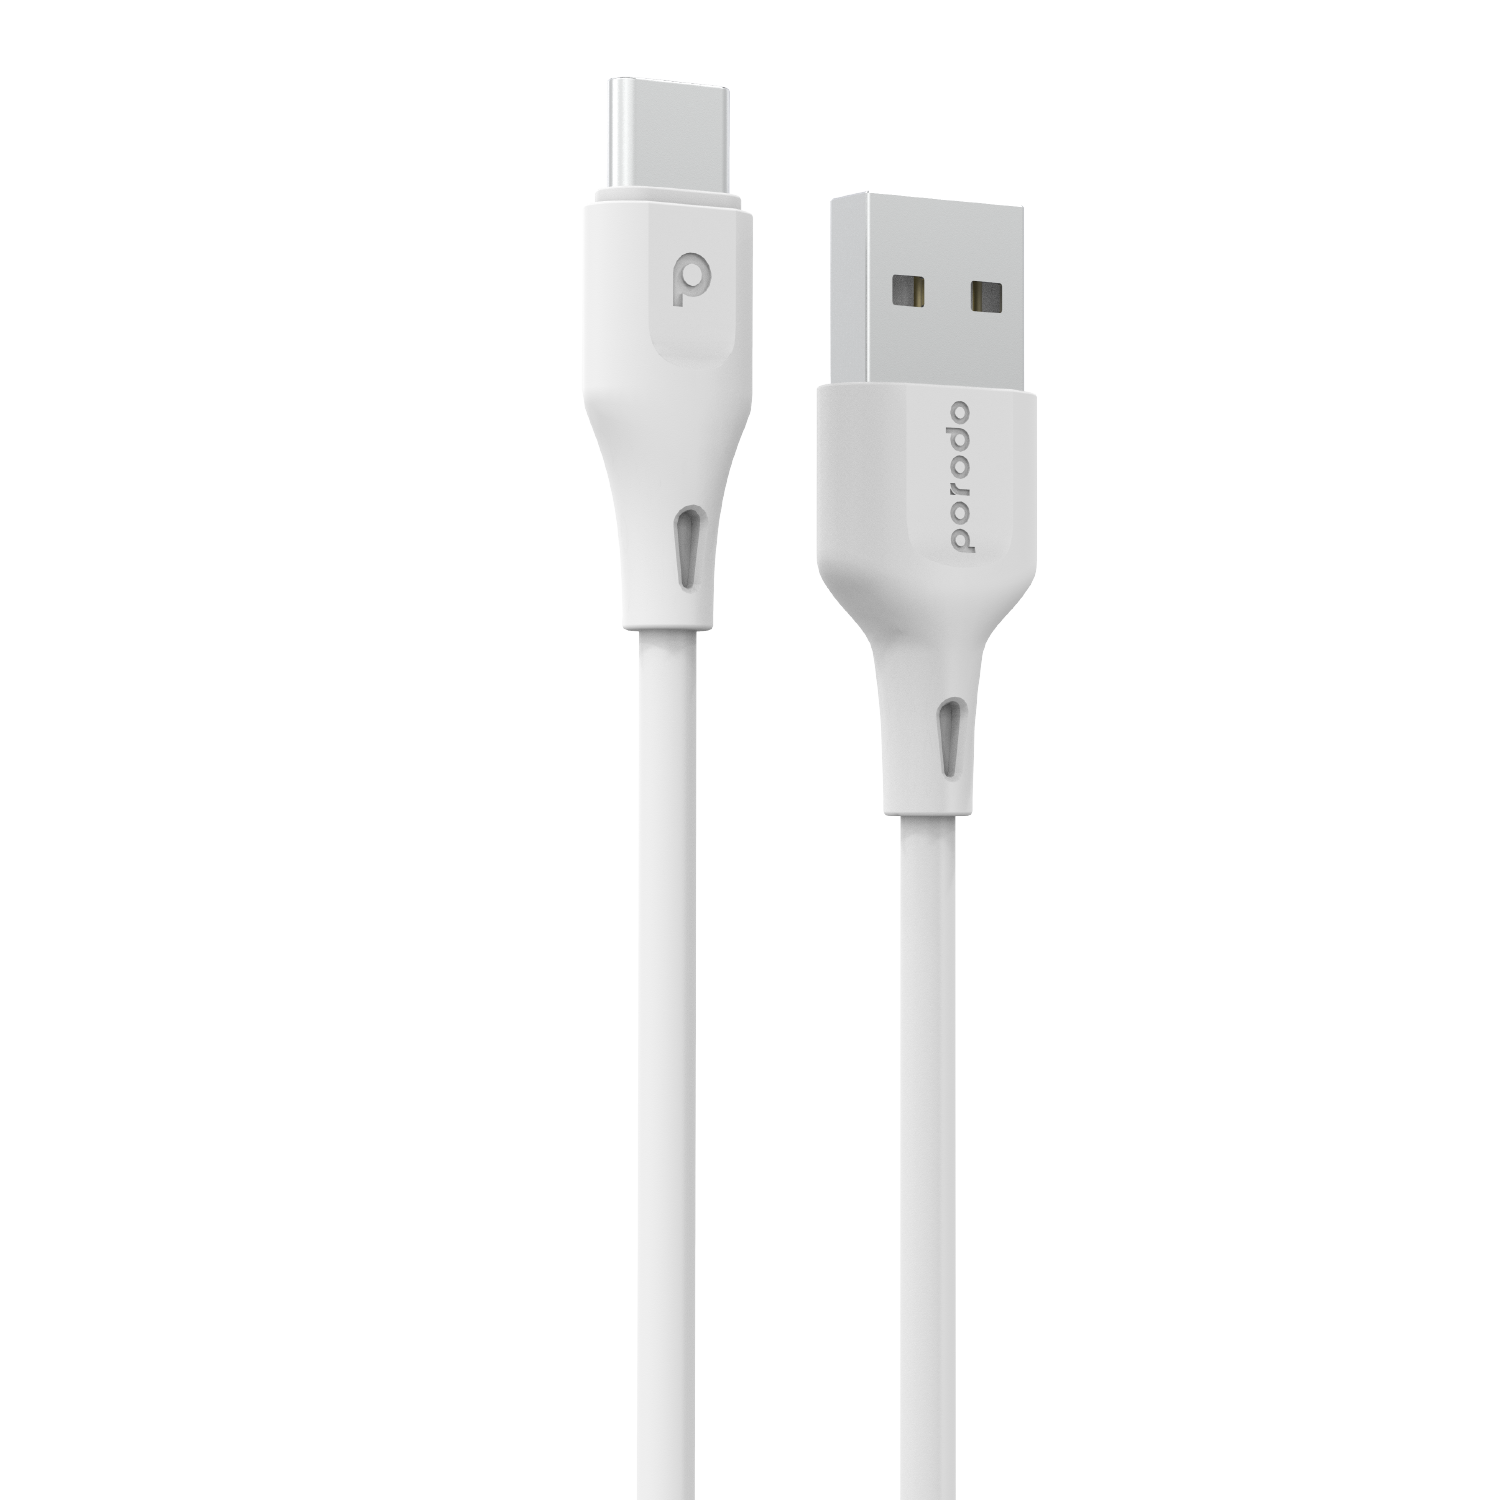 Porodo USB Cable Type-C Connector 3A Durable Fast Charge and Data Cable (3m/10ft) - Black - GSYL